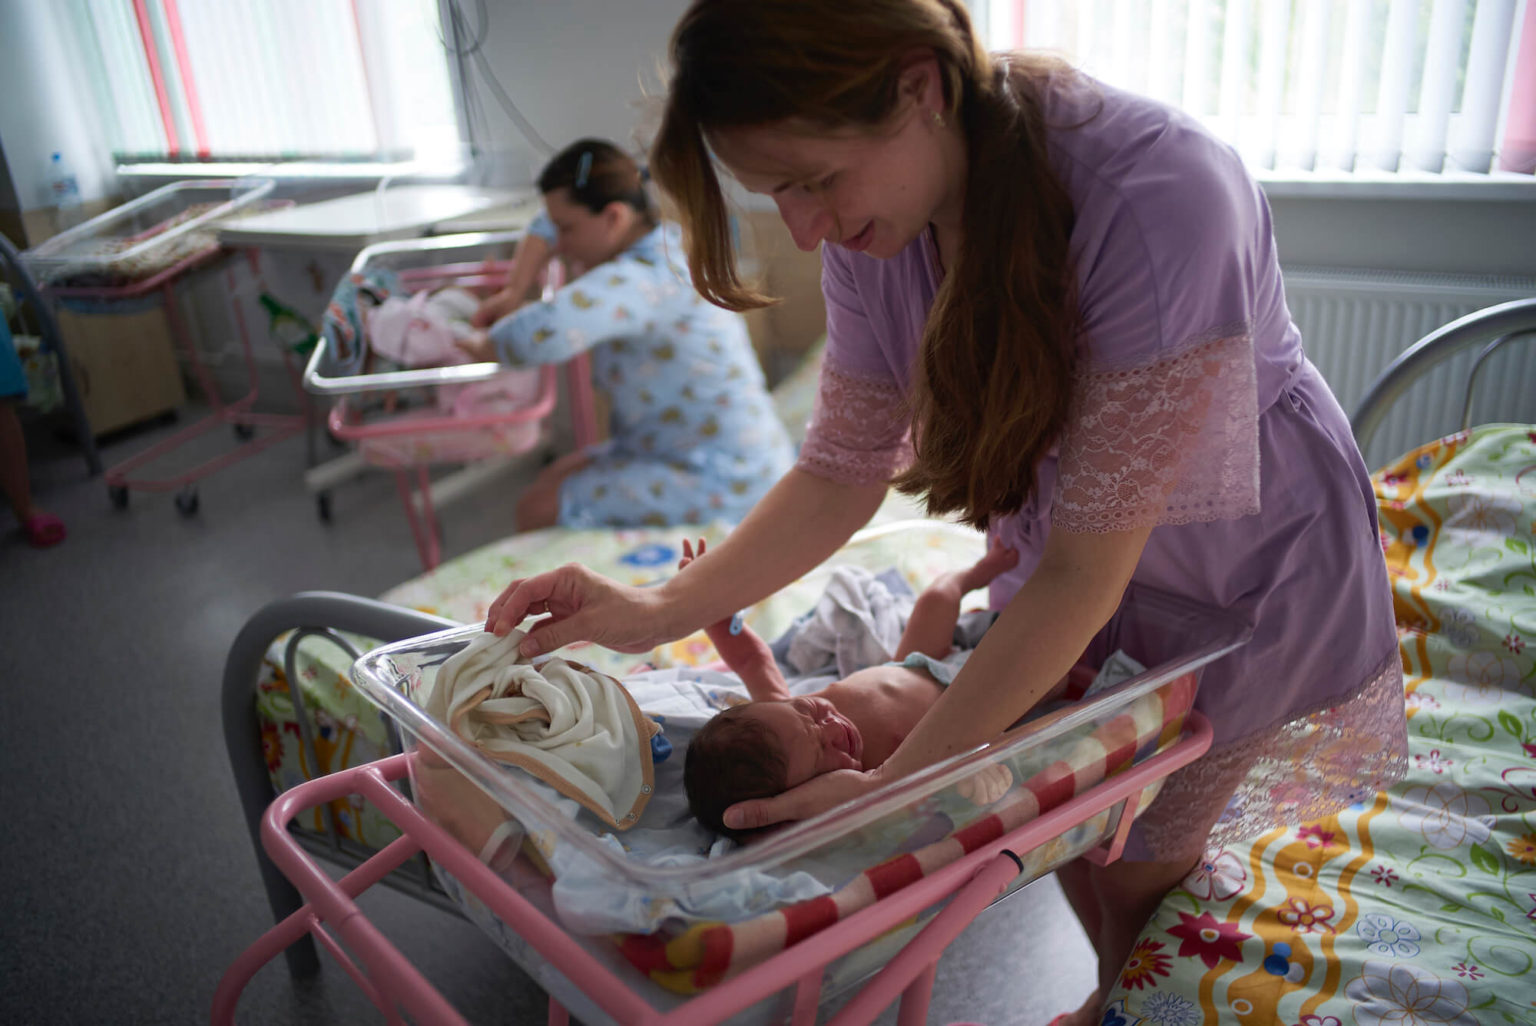 A caregiver in Belarus smiling and reaching to hold a small baby in a bed